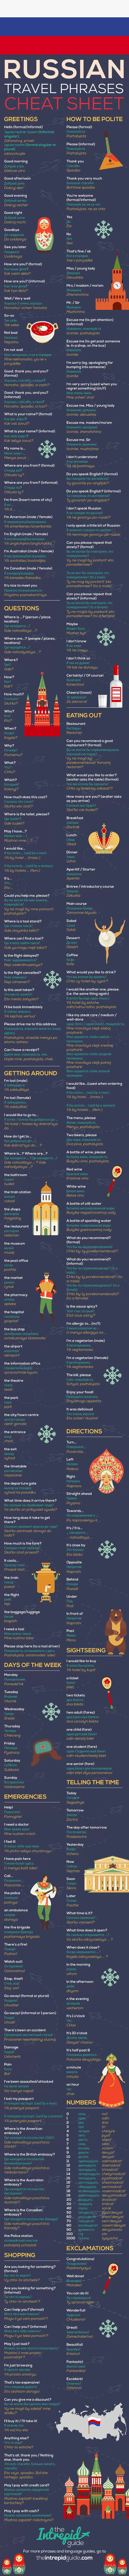 Basic Russian words and Essential Russian Phrases Infographic